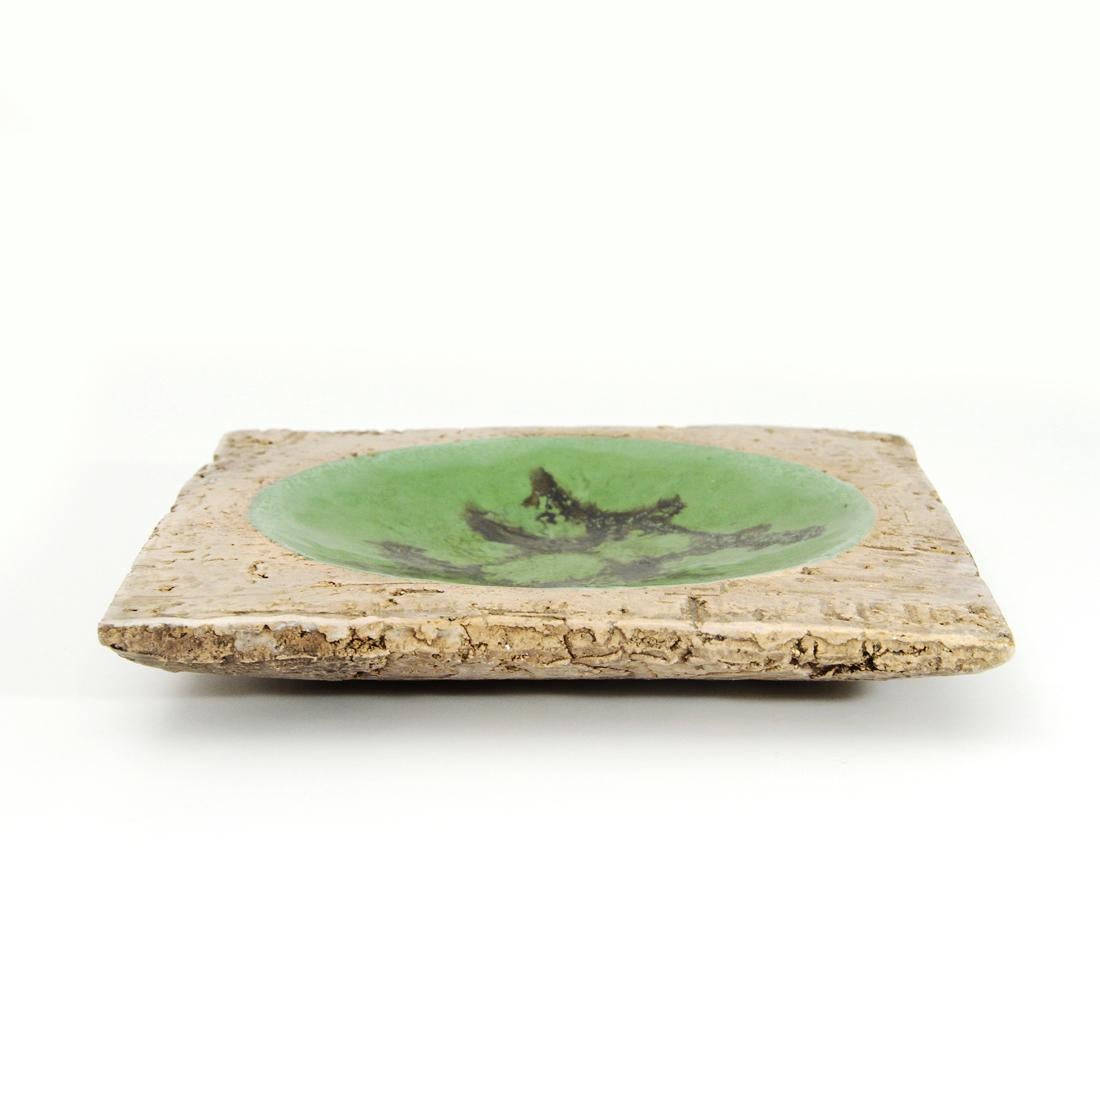 Albisola ceramic stoneware holder, made by master Carlos Carlè in 1971.
Square shape, black primitive symbol on a green background.
Good general conditions.

Dimensions: Width 20 cm, depth 20 cm, height 3 cm.